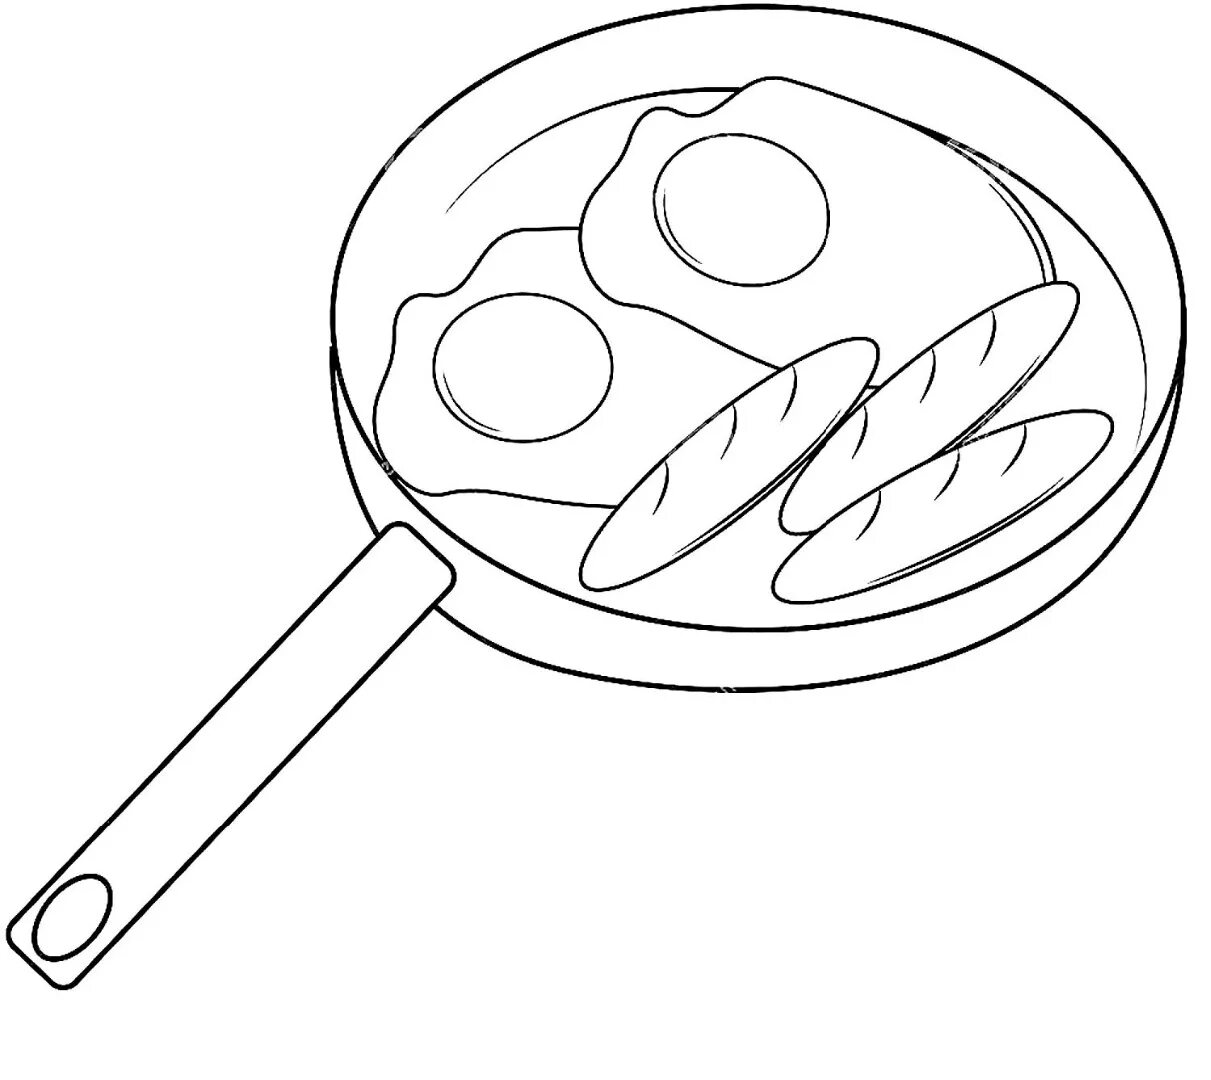 Fancy omelet coloring page